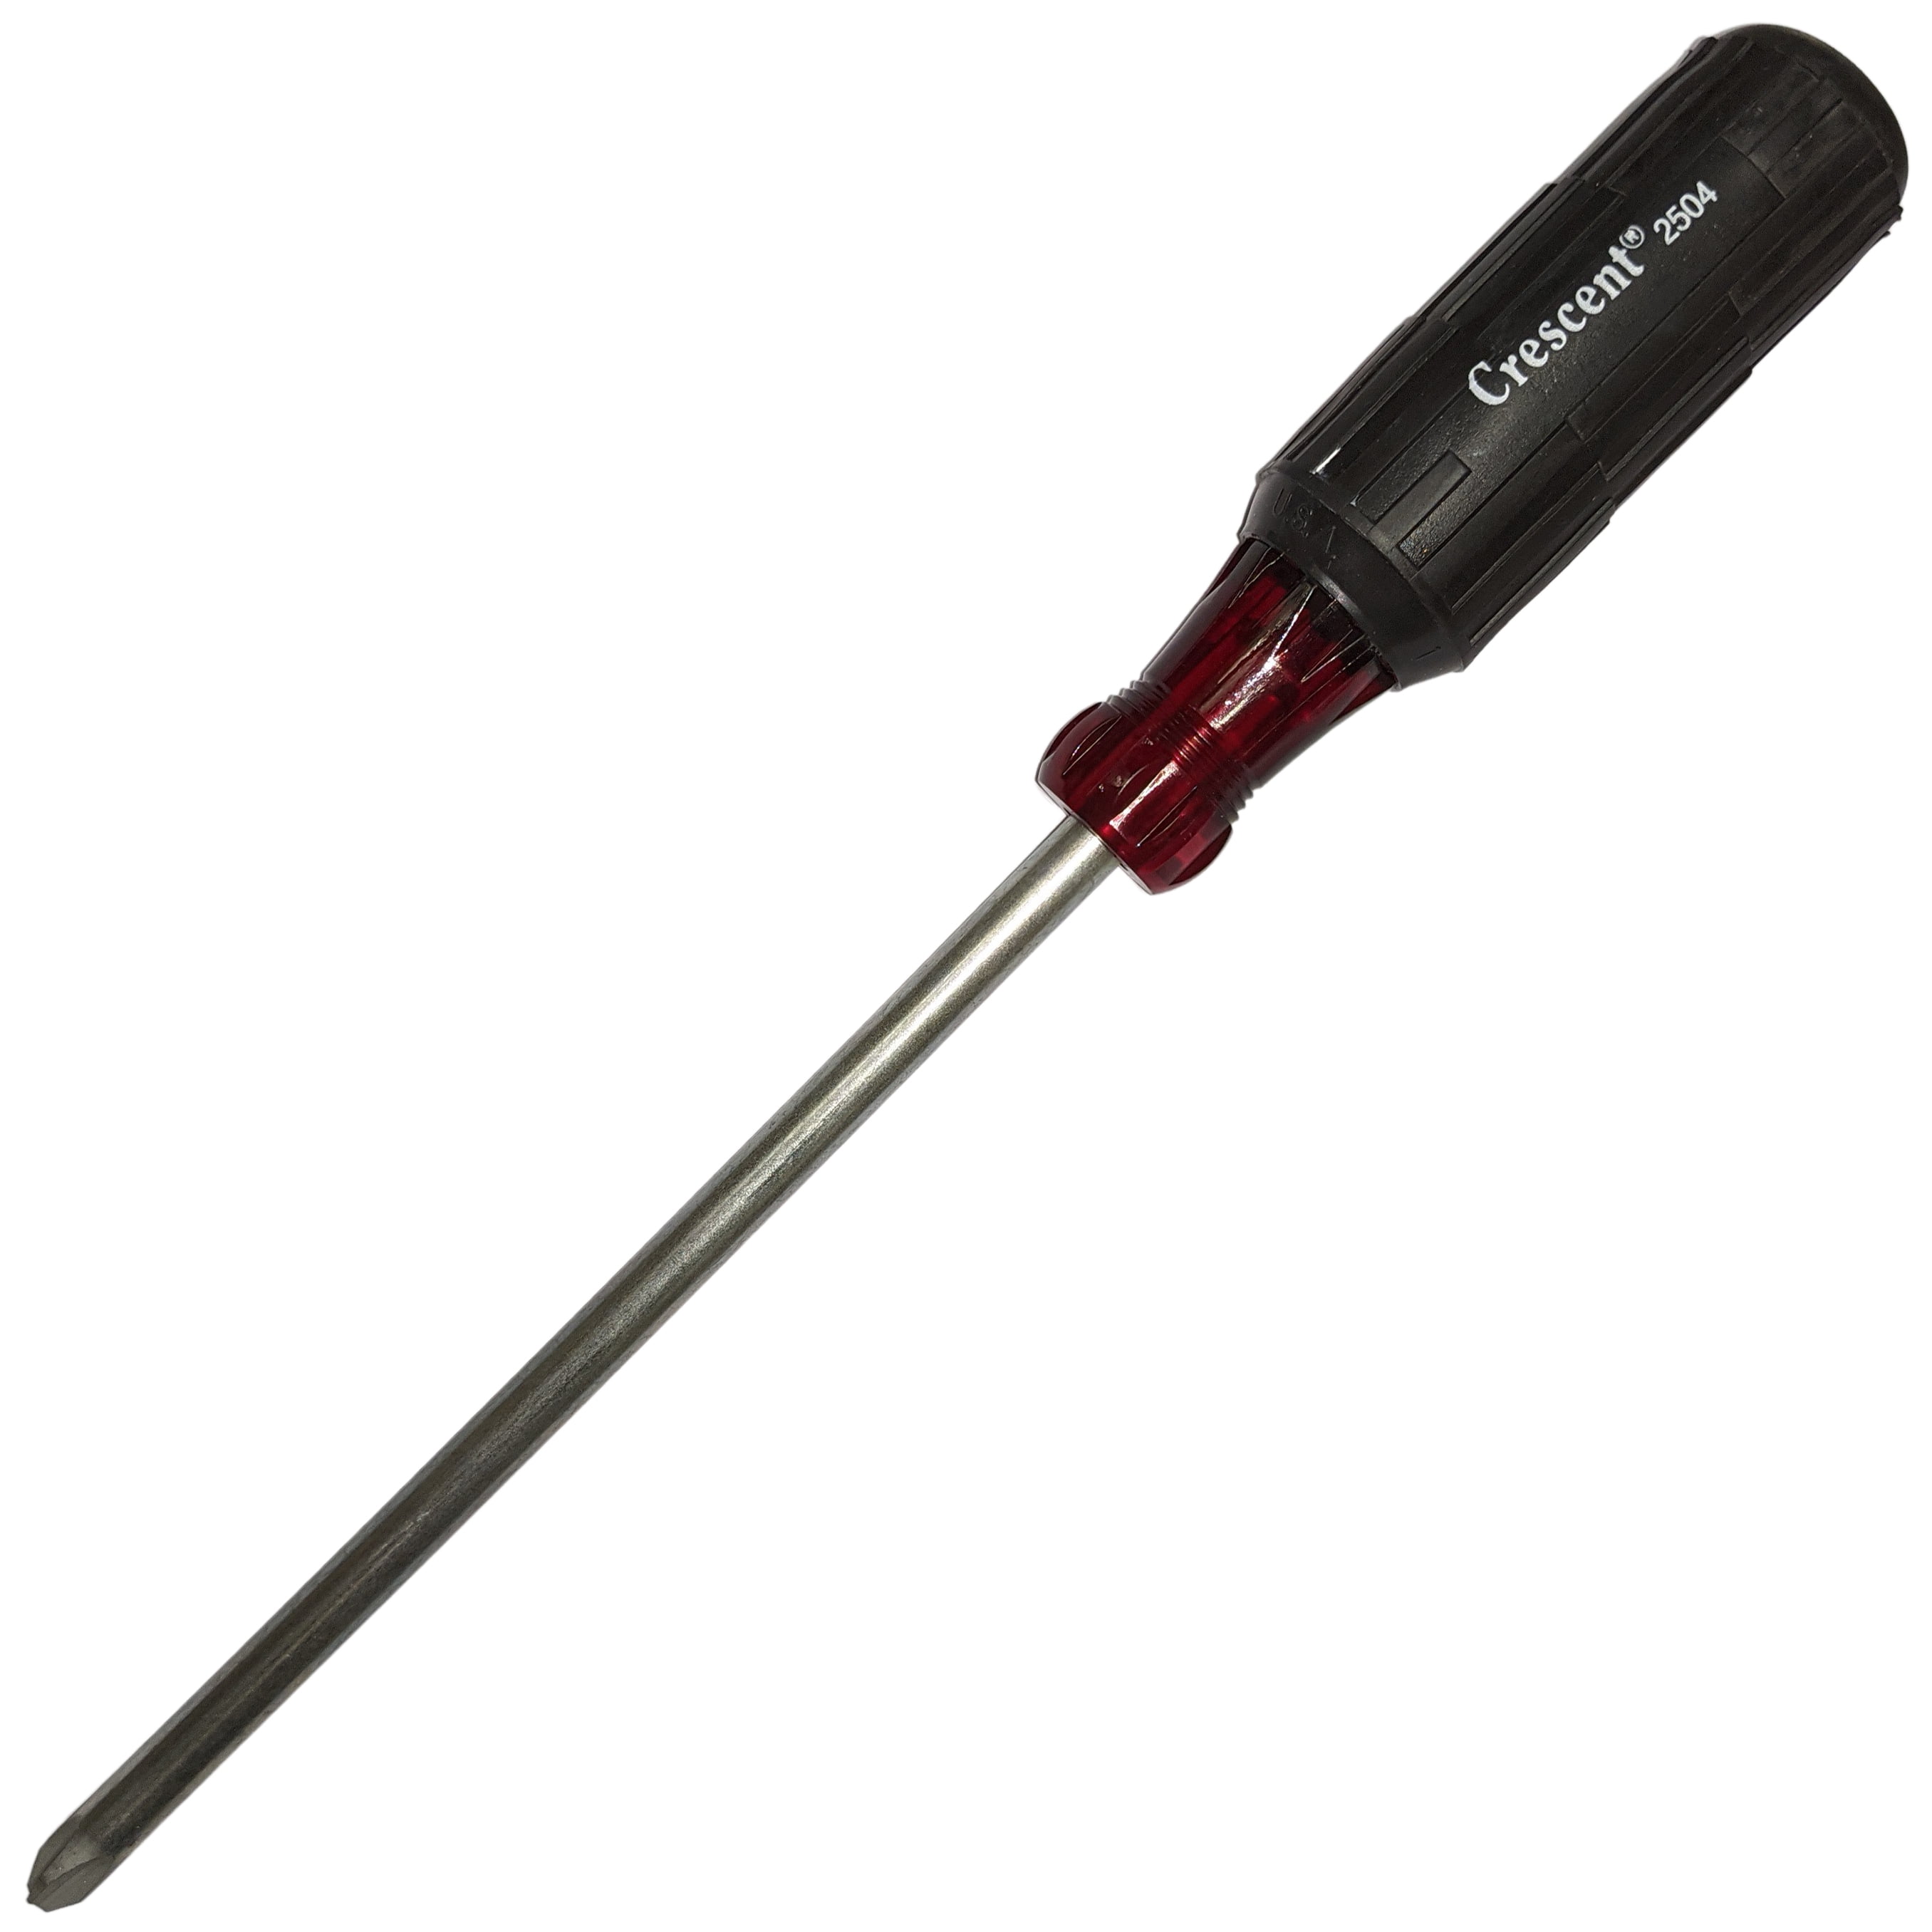 Crescent 2504 #4 Phillips Screwdriver 8" Shank 13-1/2" Overall QTY 1 